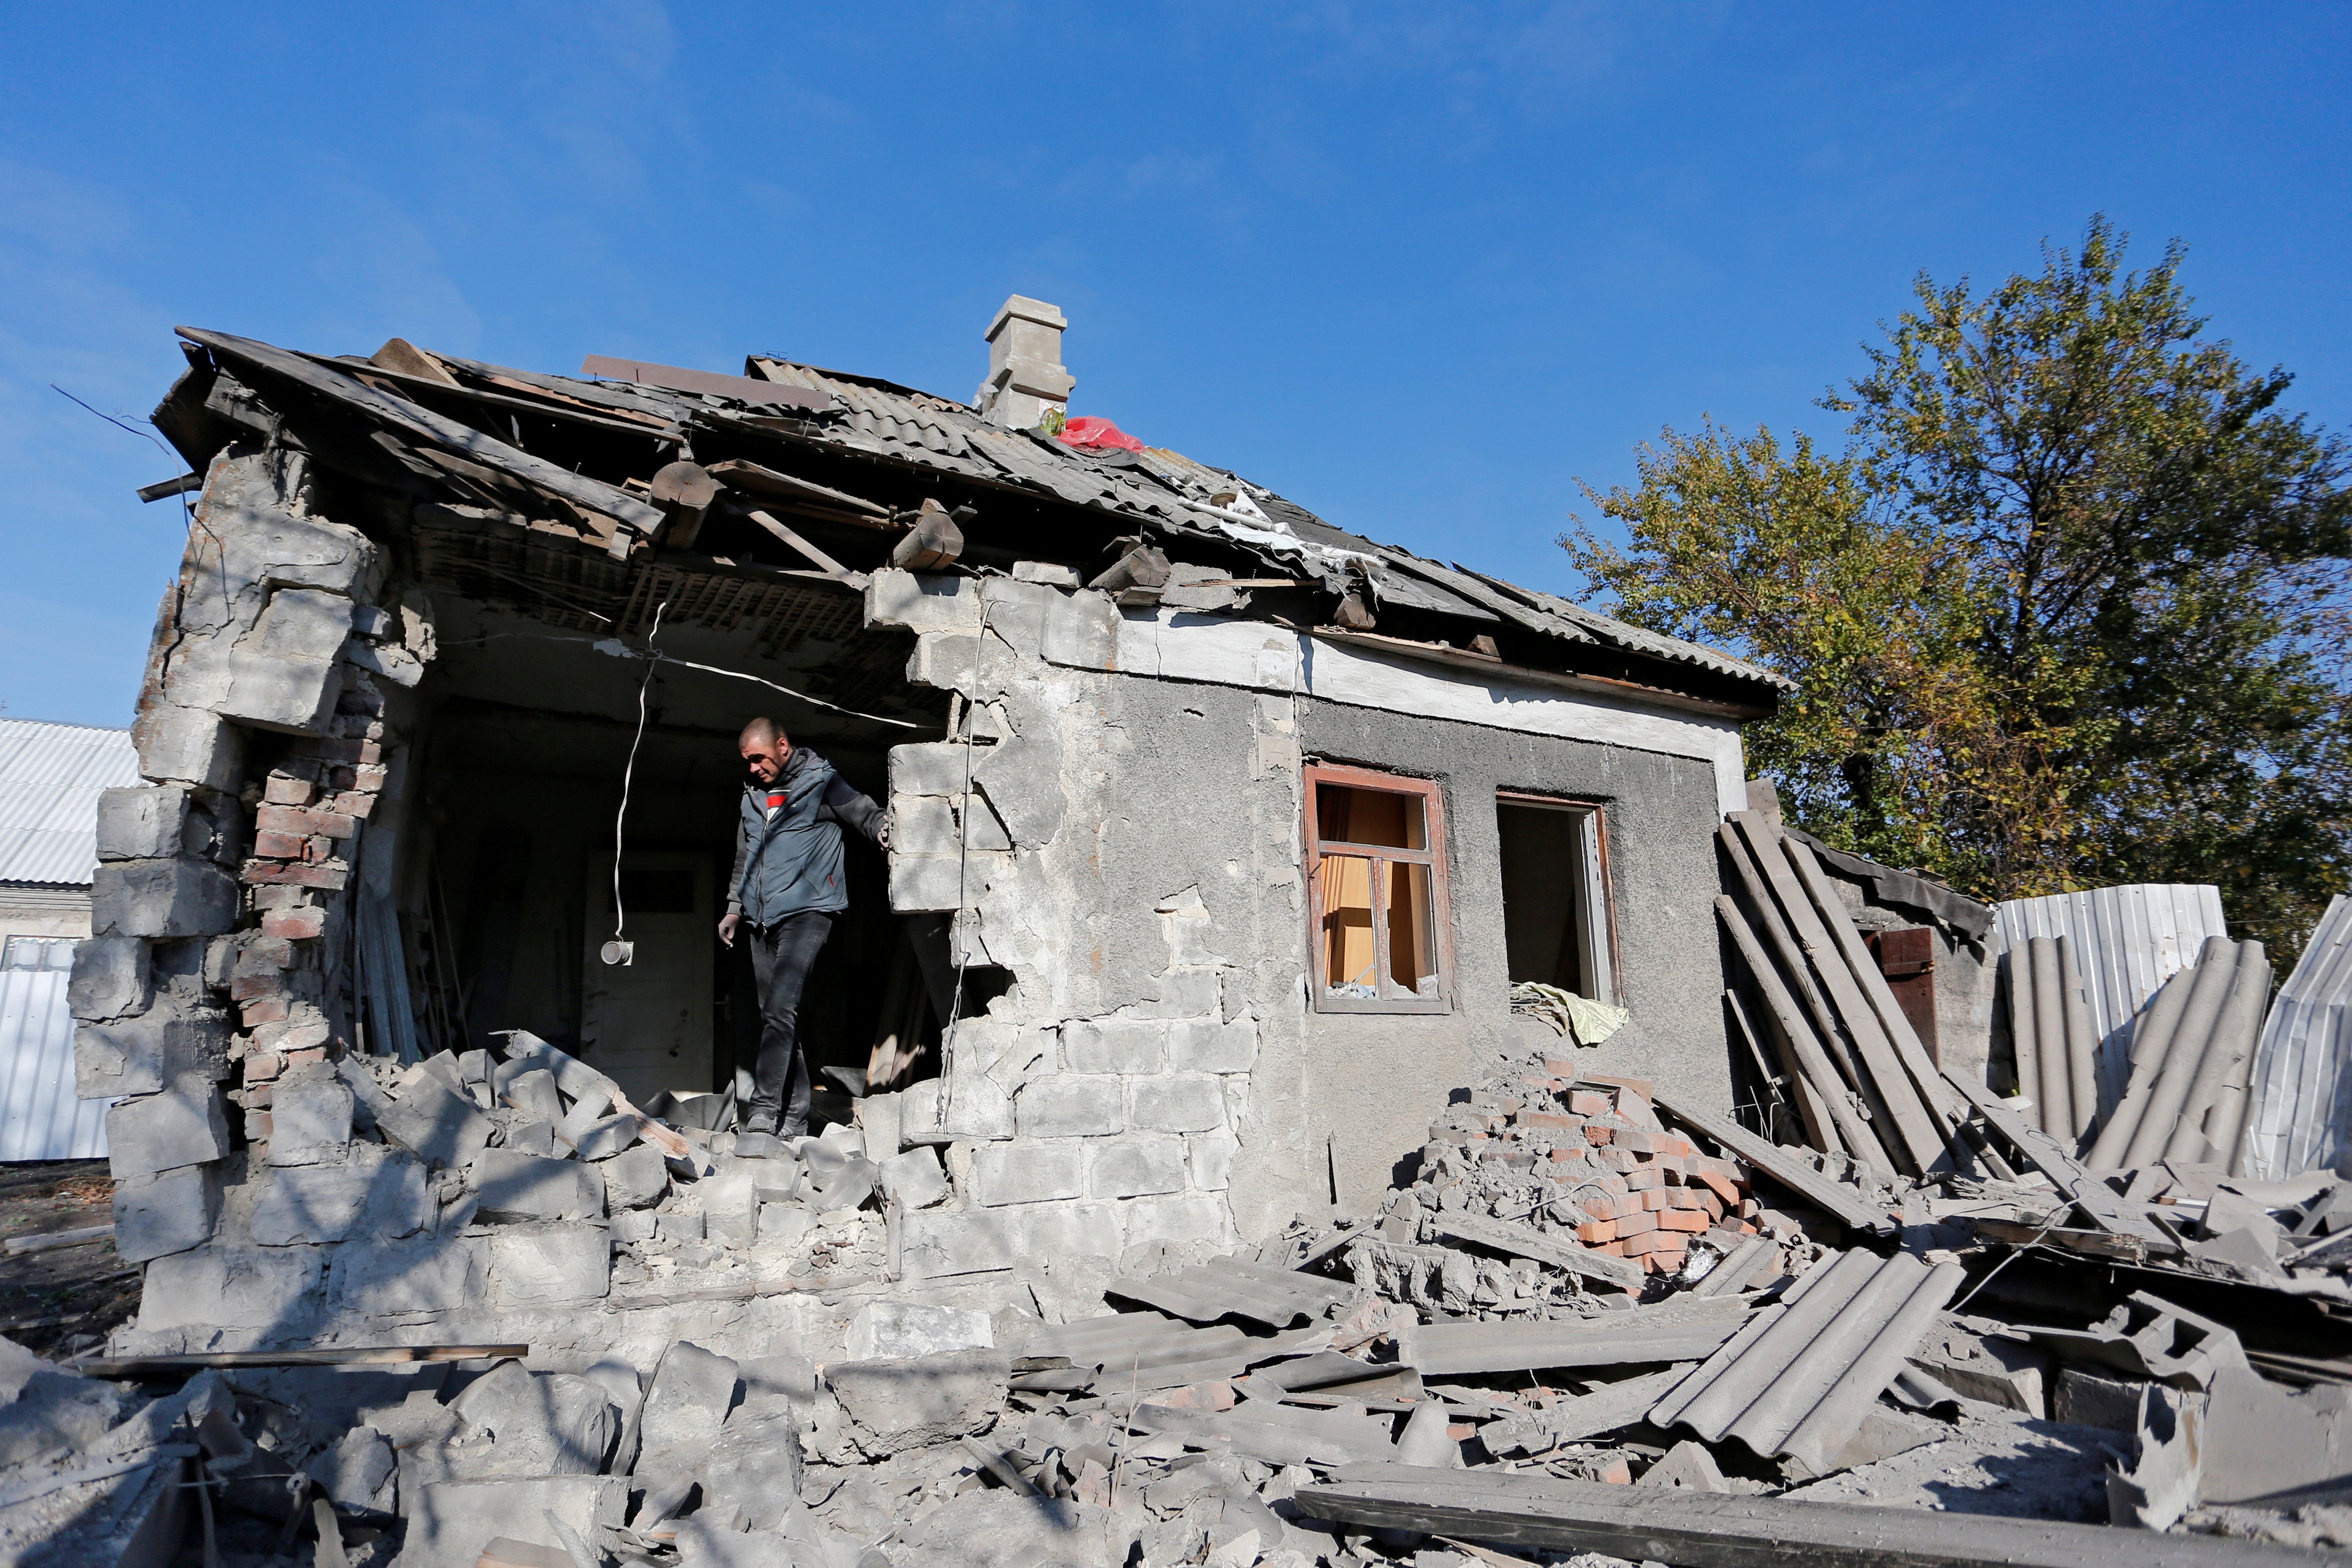 Local resident Pavel is seen inside his house, which locals said was damaged during recent shelling, on the outskirts of the rebel-controlled city of Donetsk in October